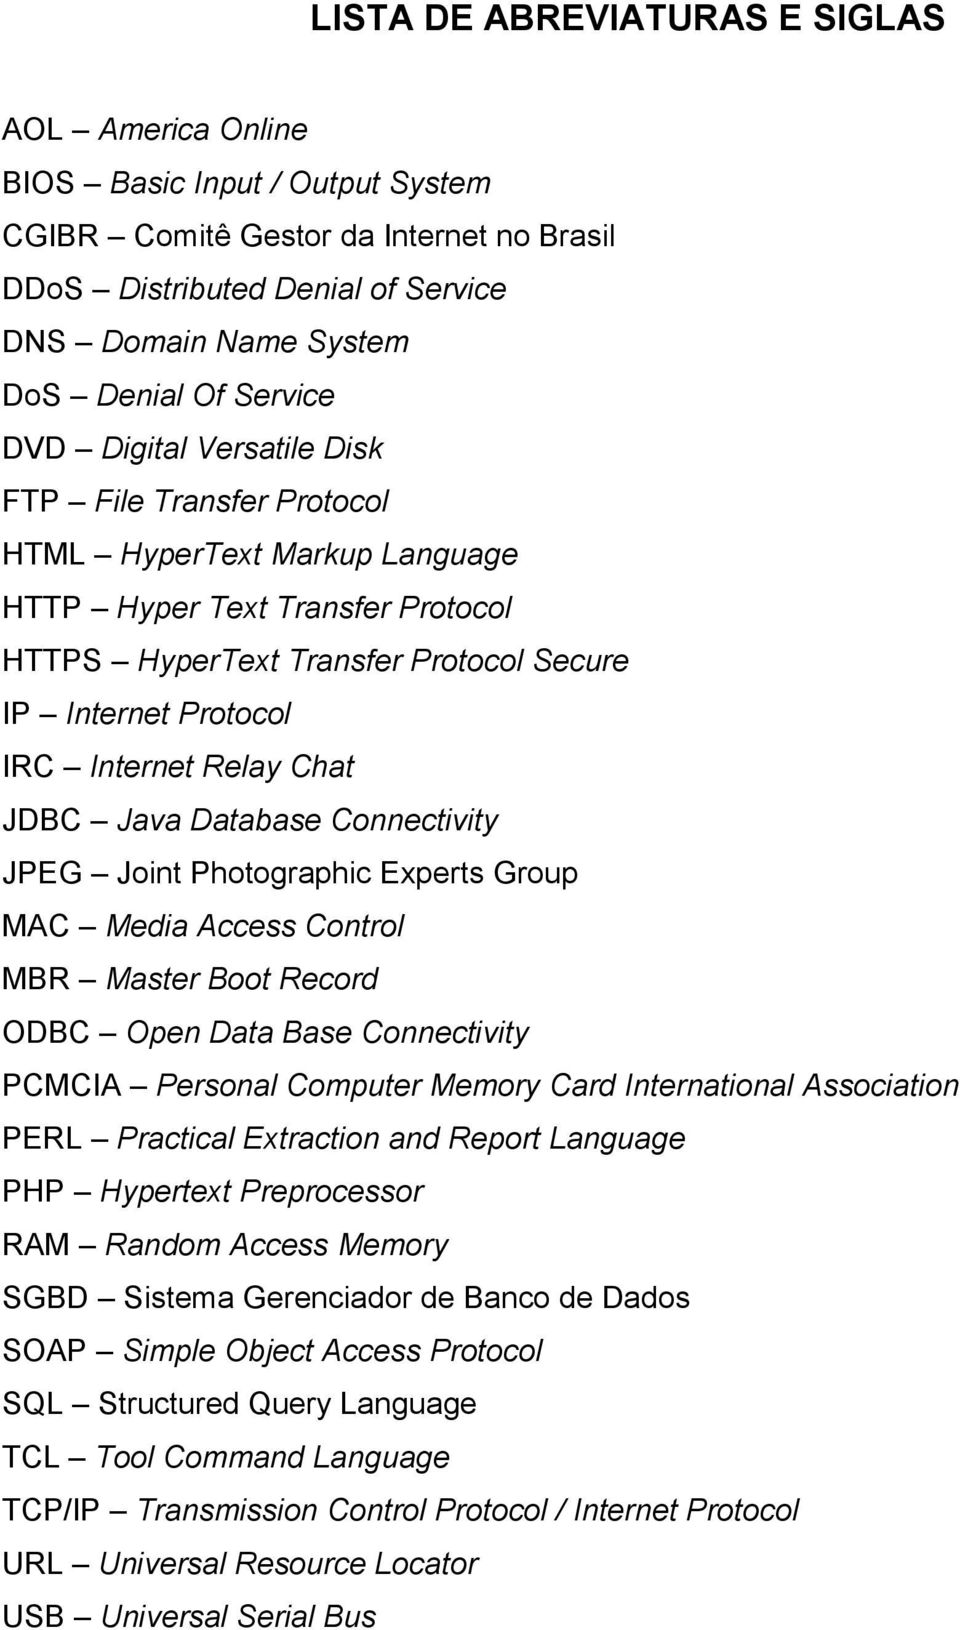 Internet Relay Chat JDBC Java Database Connectivity JPEG Joint Photographic Experts Group MAC Media Access Control MBR Master Boot Record ODBC Open Data Base Connectivity PCMCIA Personal Computer